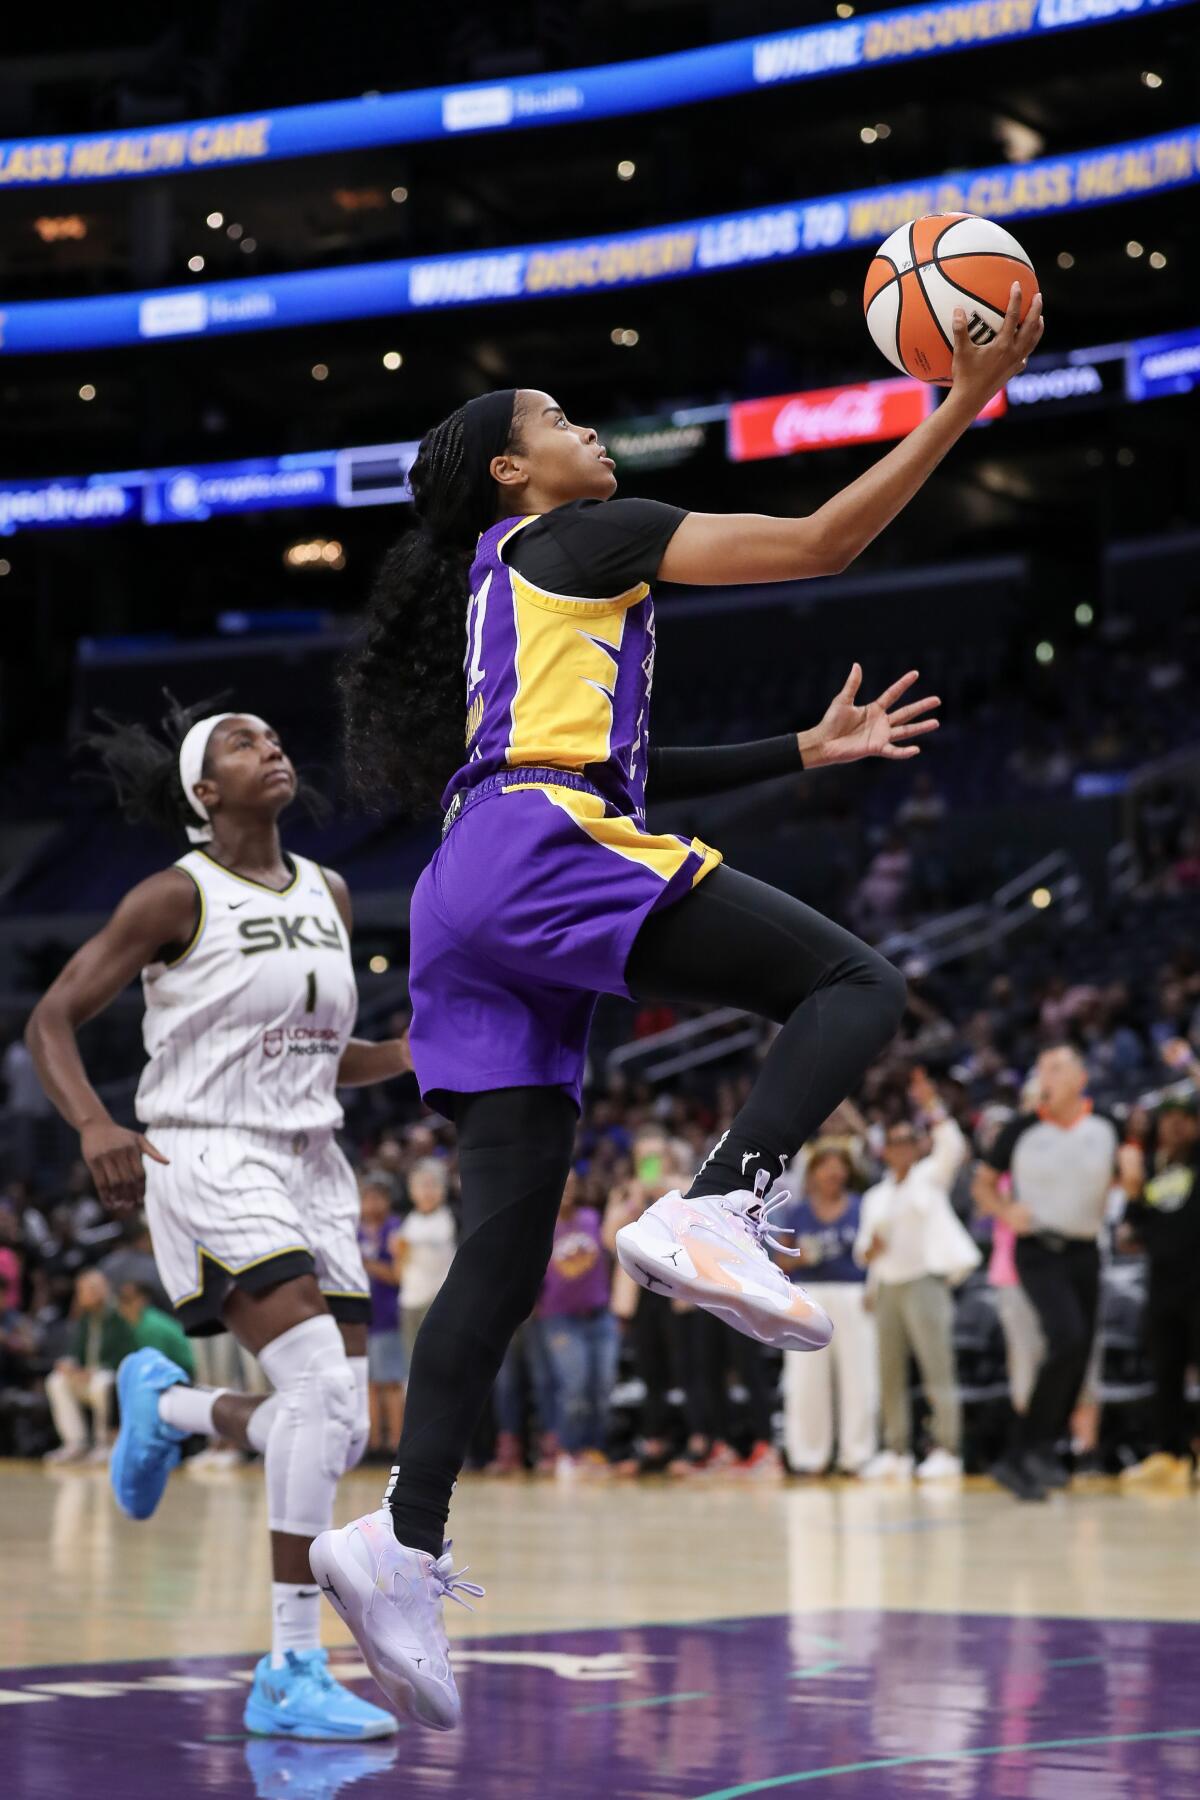 Sparks guard Jordin Canada drives for a layup against the Sky in the first half Tuesday night.